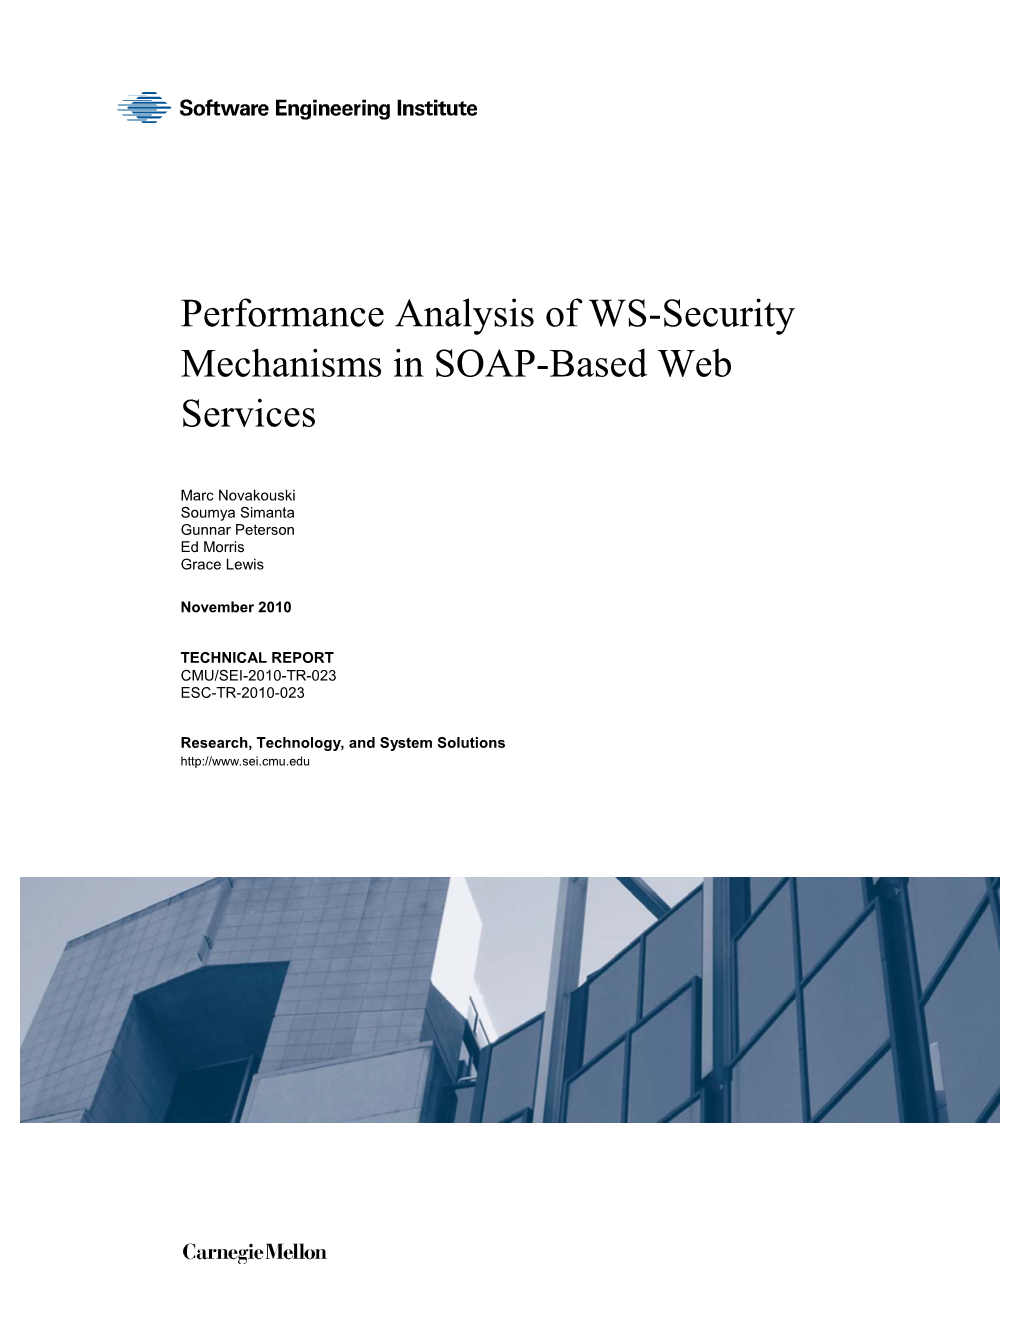 Performance Analysis of WS-Security Mechanisms in SOAP-Based Web Services